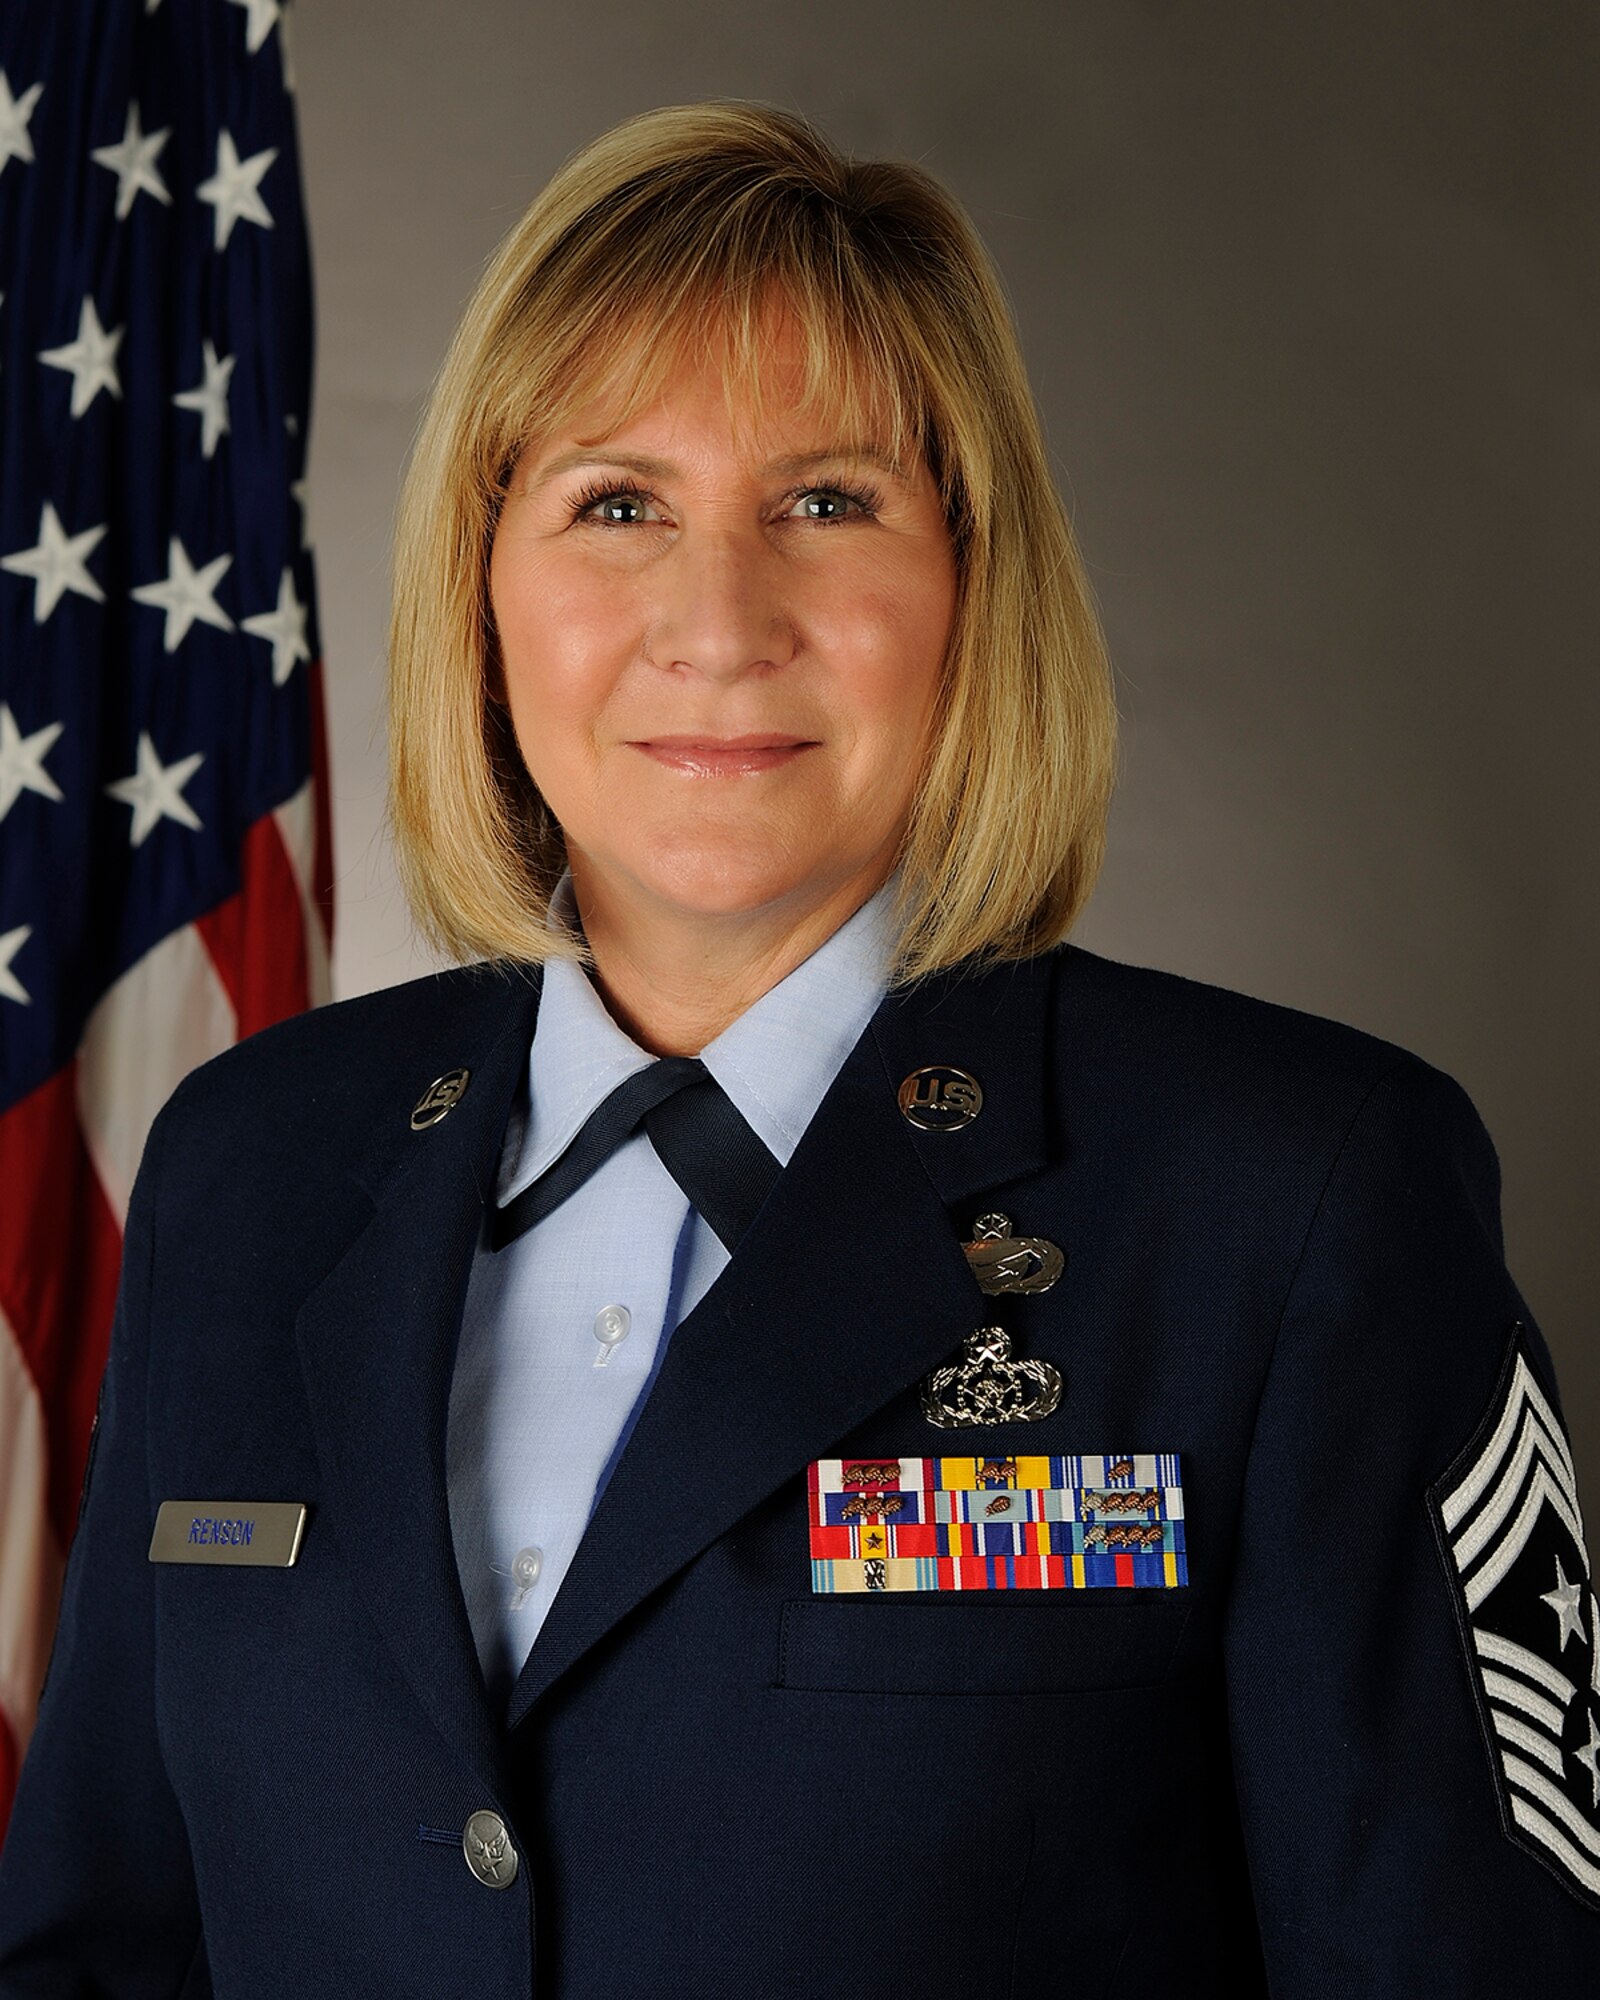 Command Chief Master Sgt. Teresa Reson served 36 years on active duty in the United States Air Force and Alaska Air National Guard.